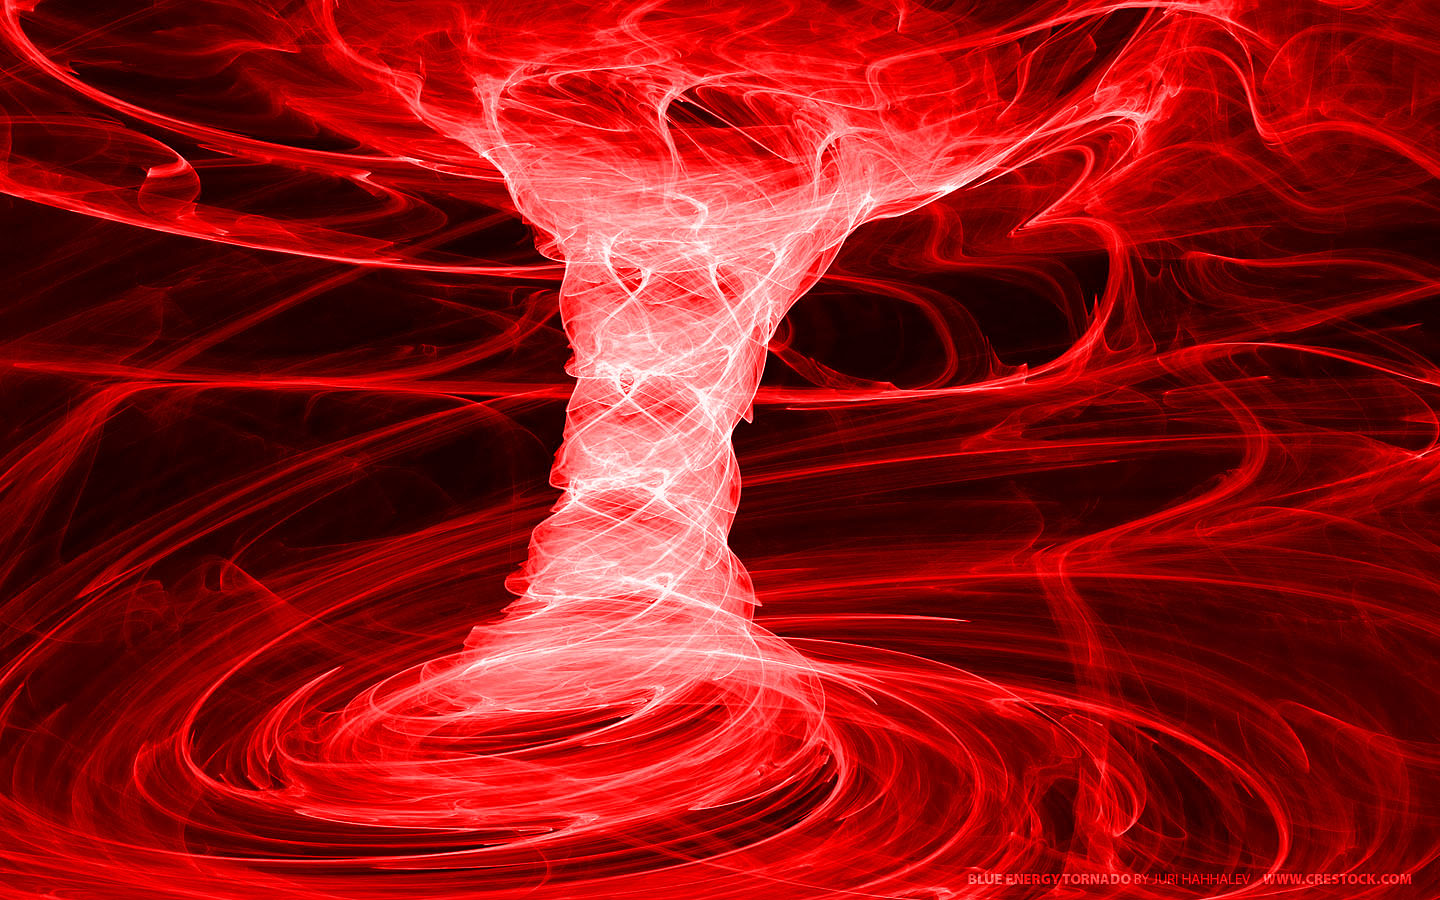 Tornado And Lightning Wallpaper Red By